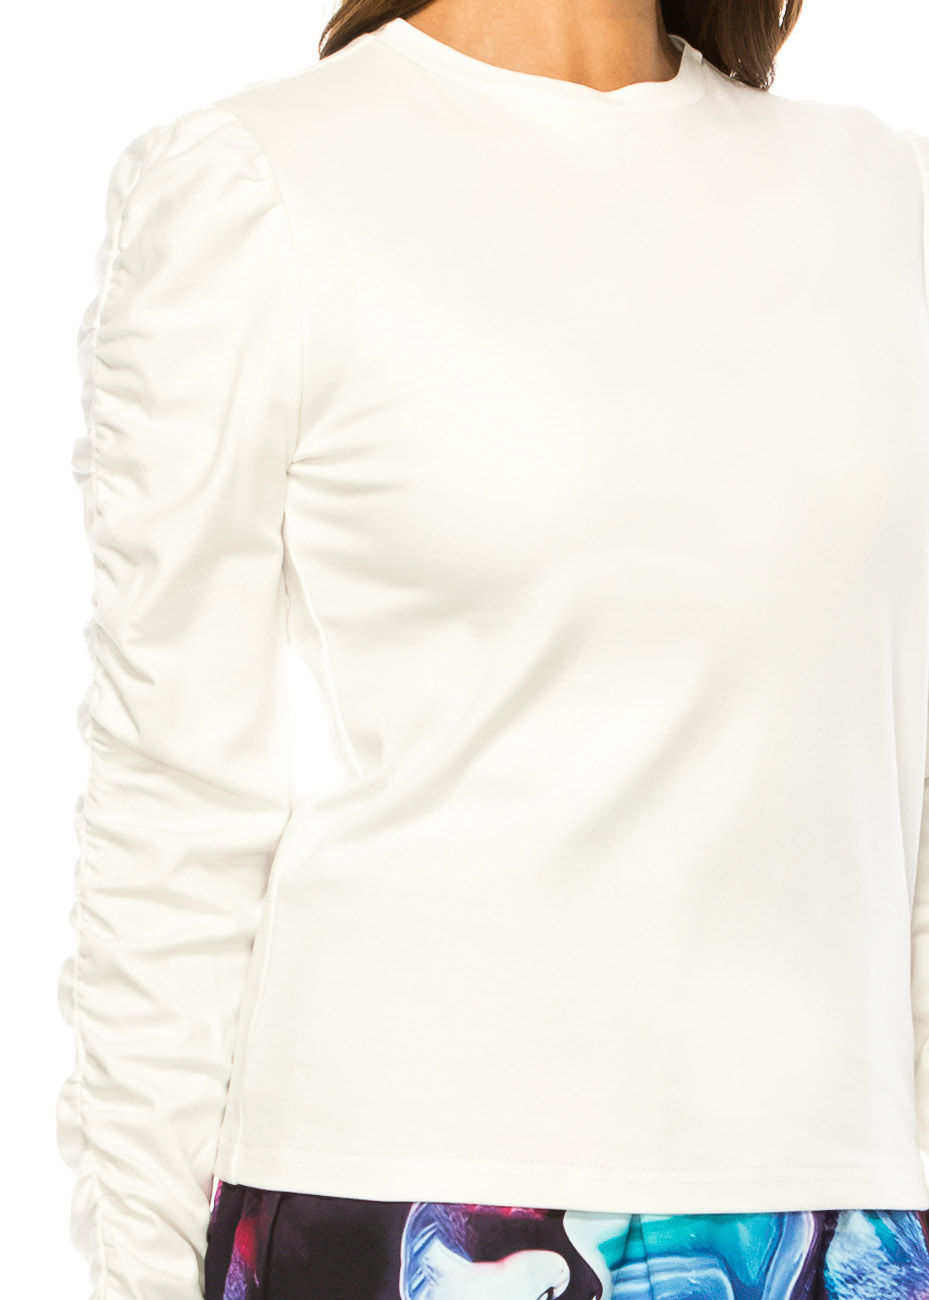 Essential White Ruched-Sleeve Tee